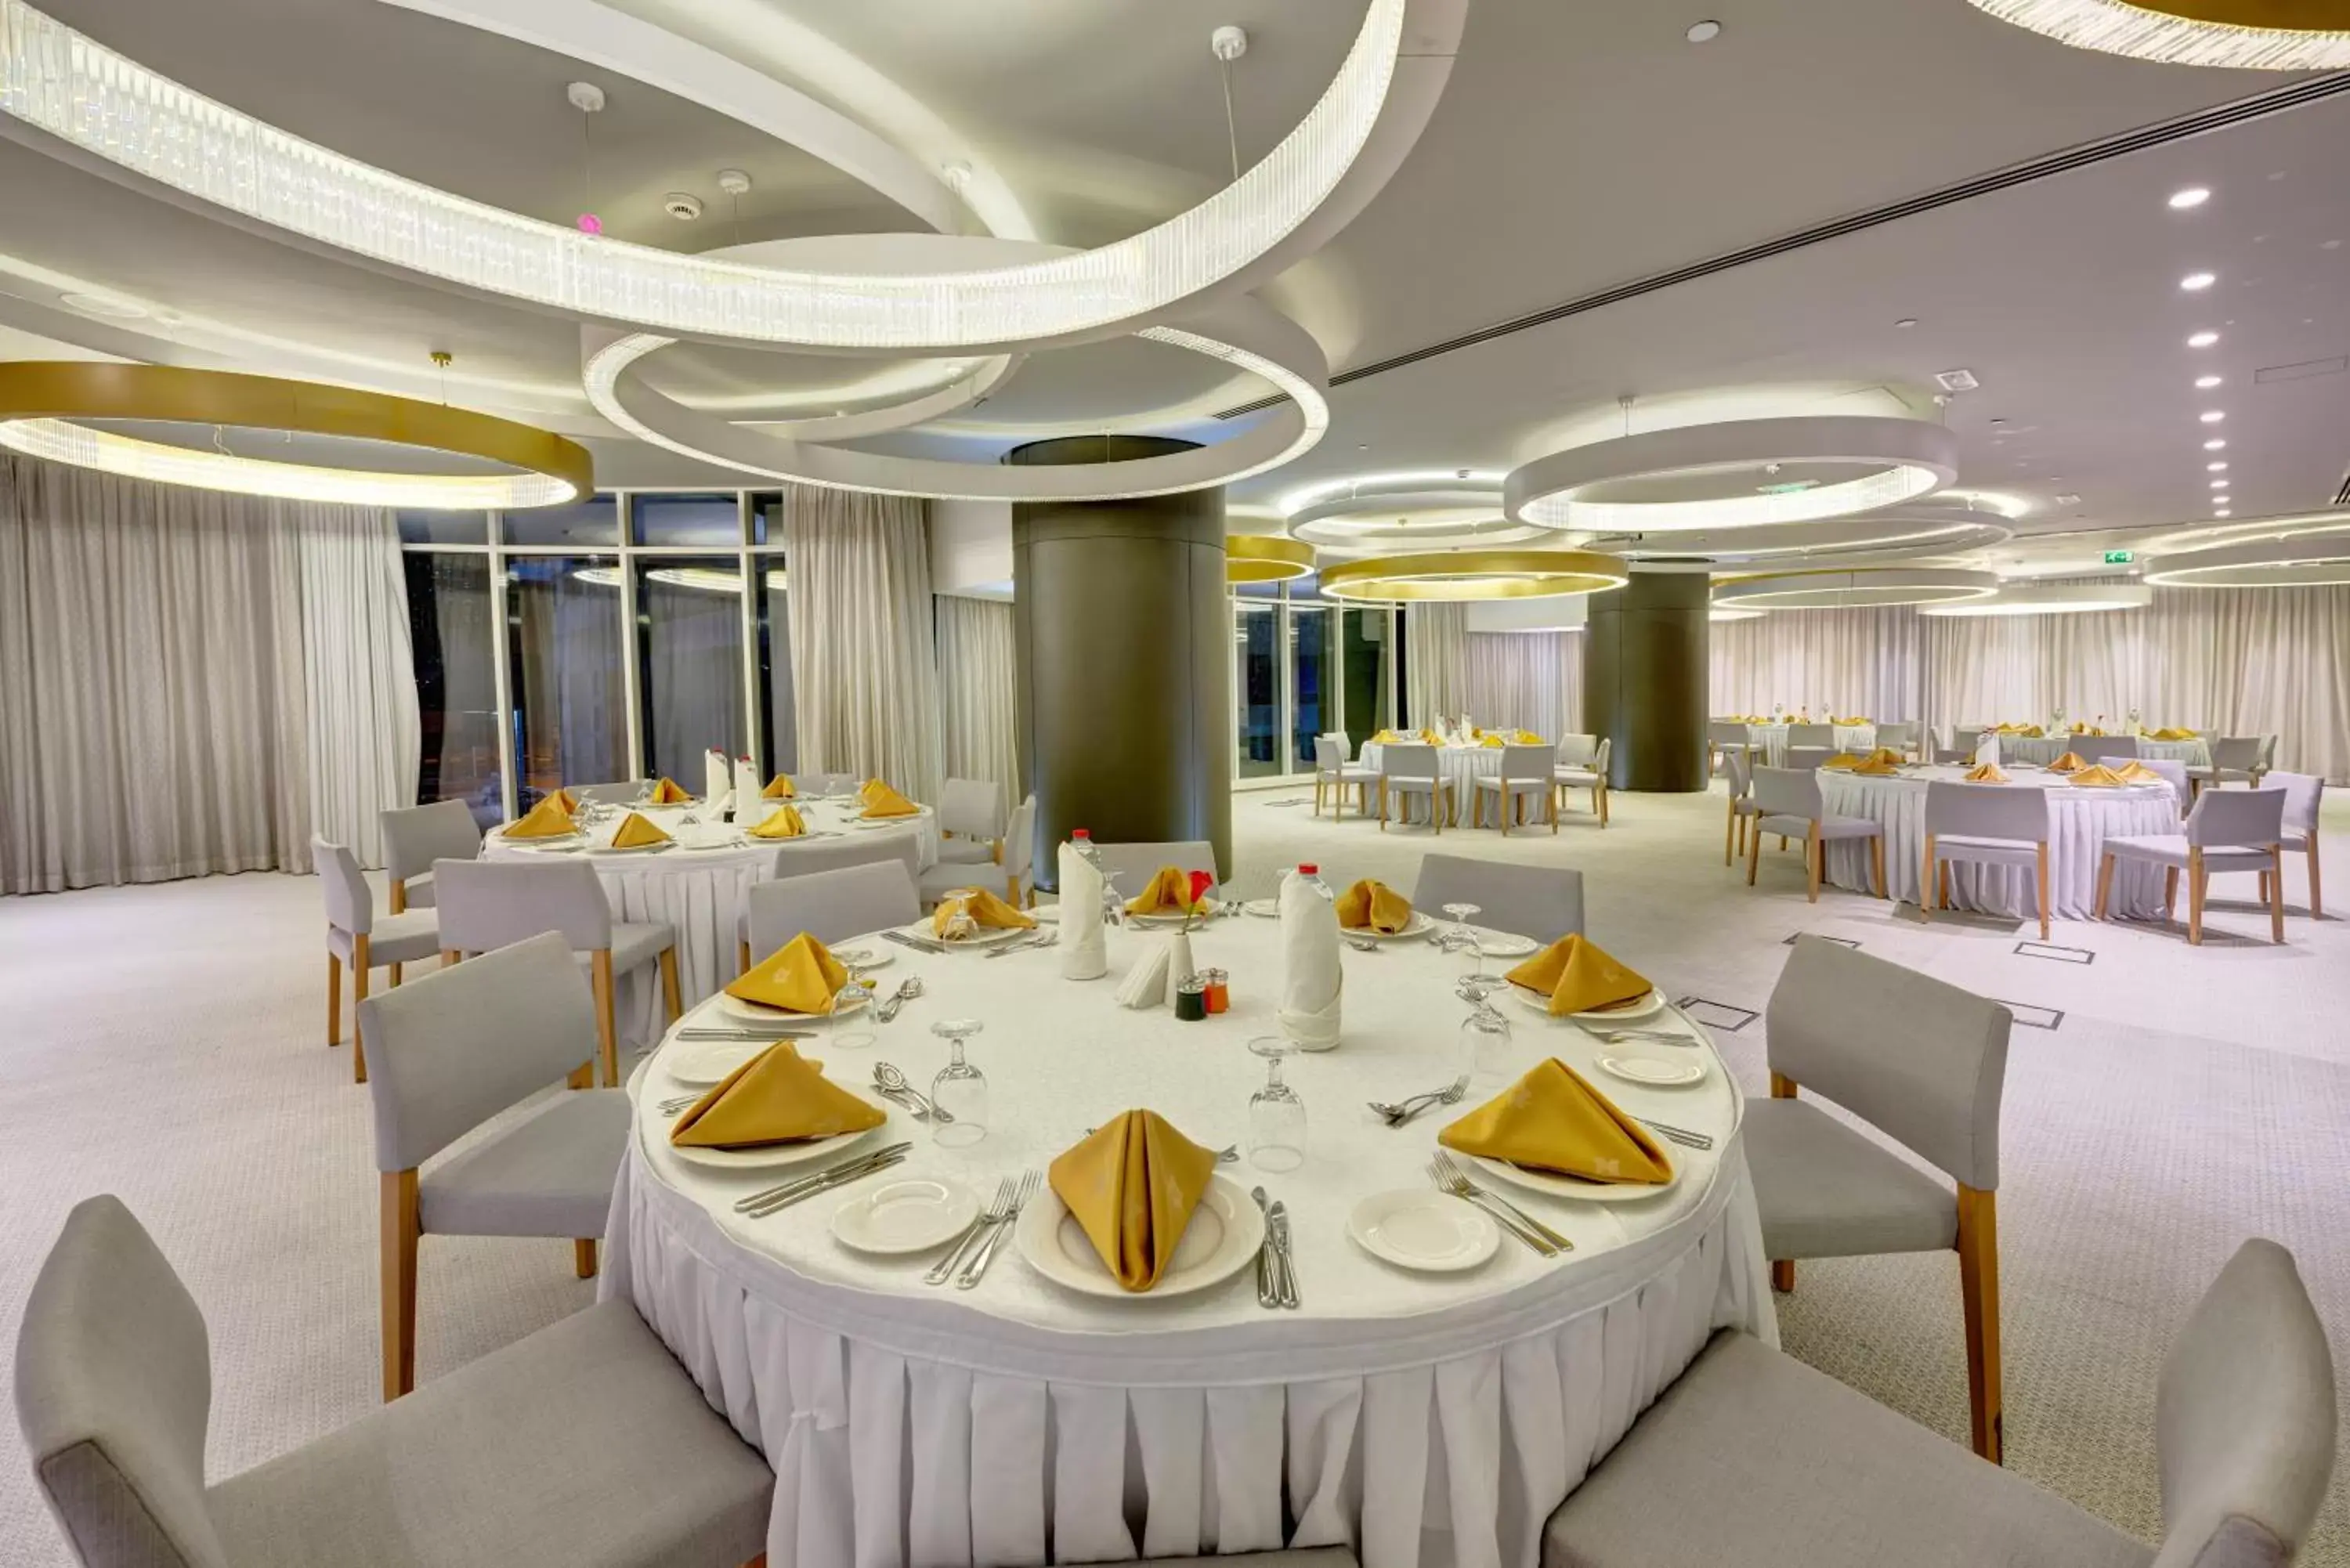 Fitness centre/facilities, Banquet Facilities in The Act Hotel Sharjah